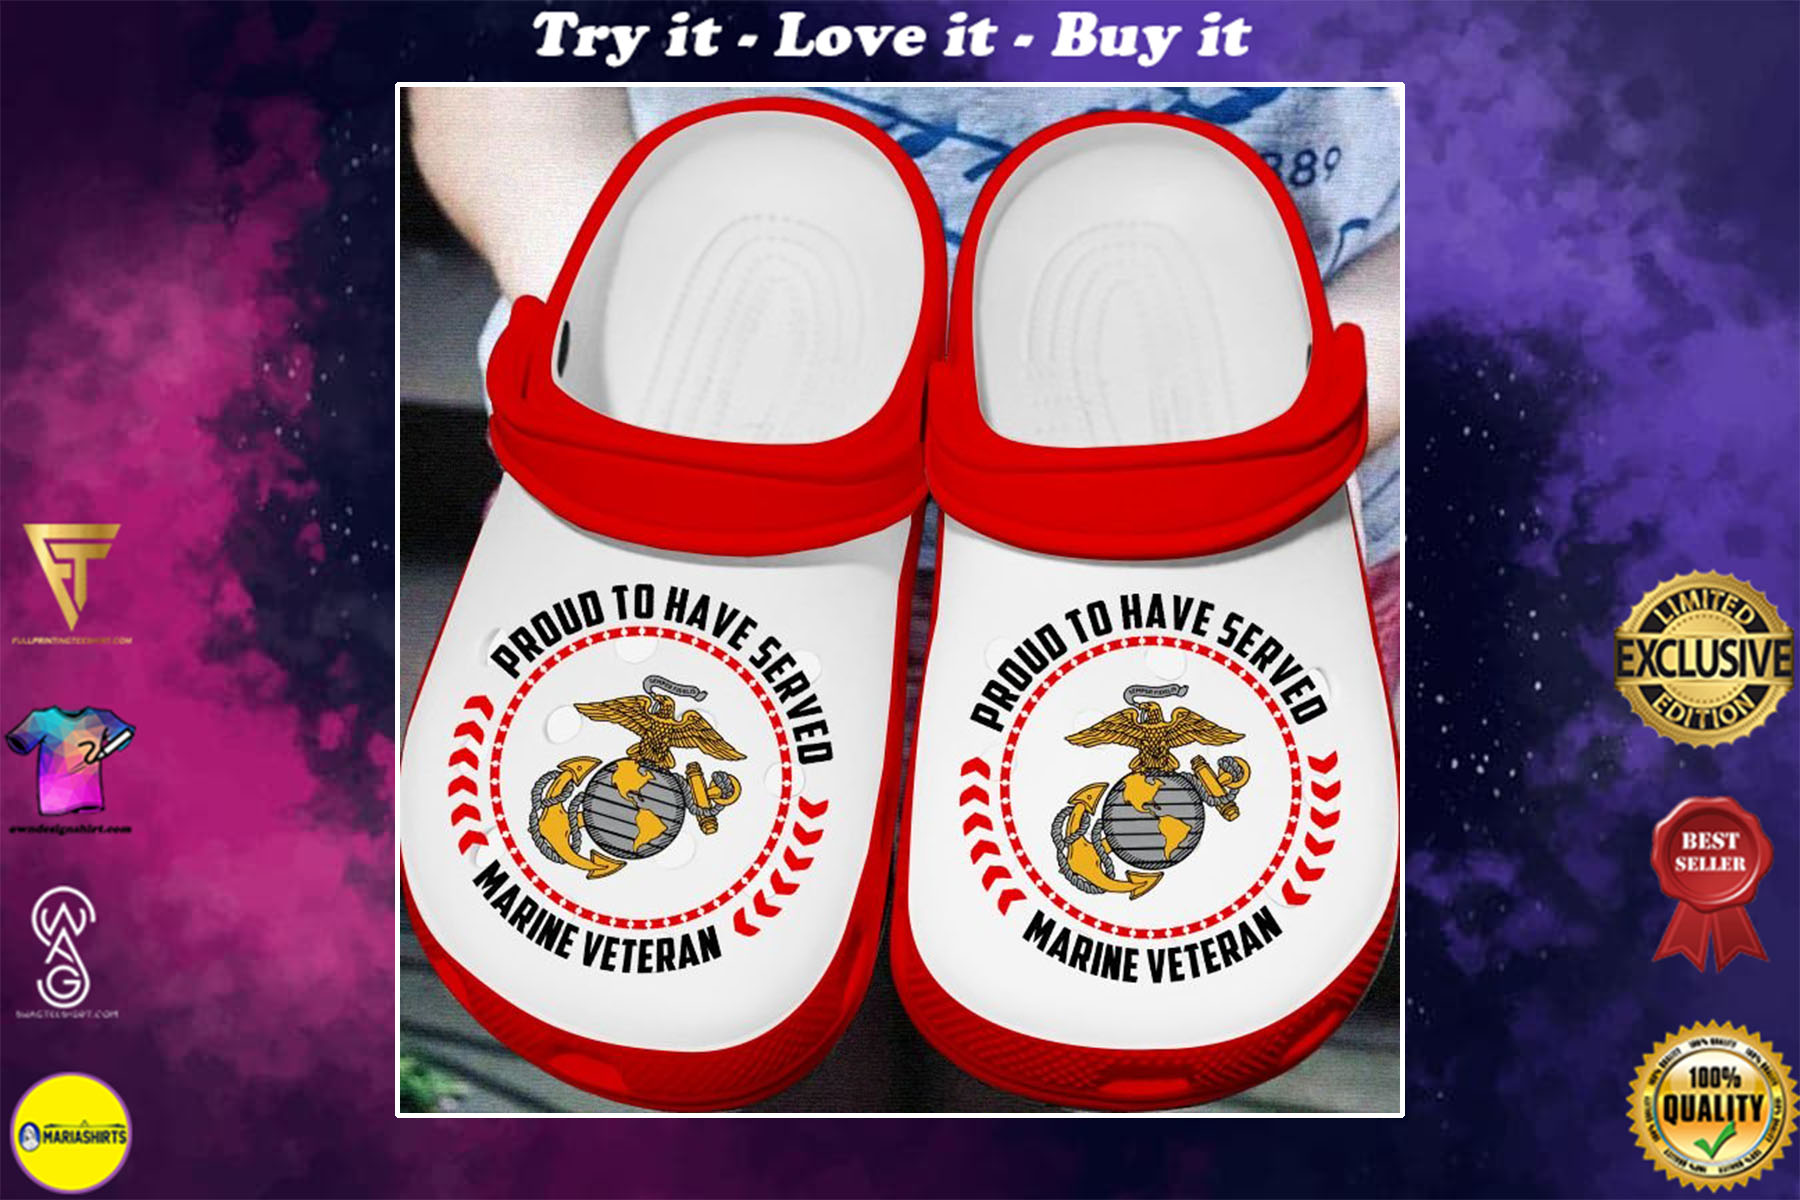 proud to have served marine veteran crocs shoes